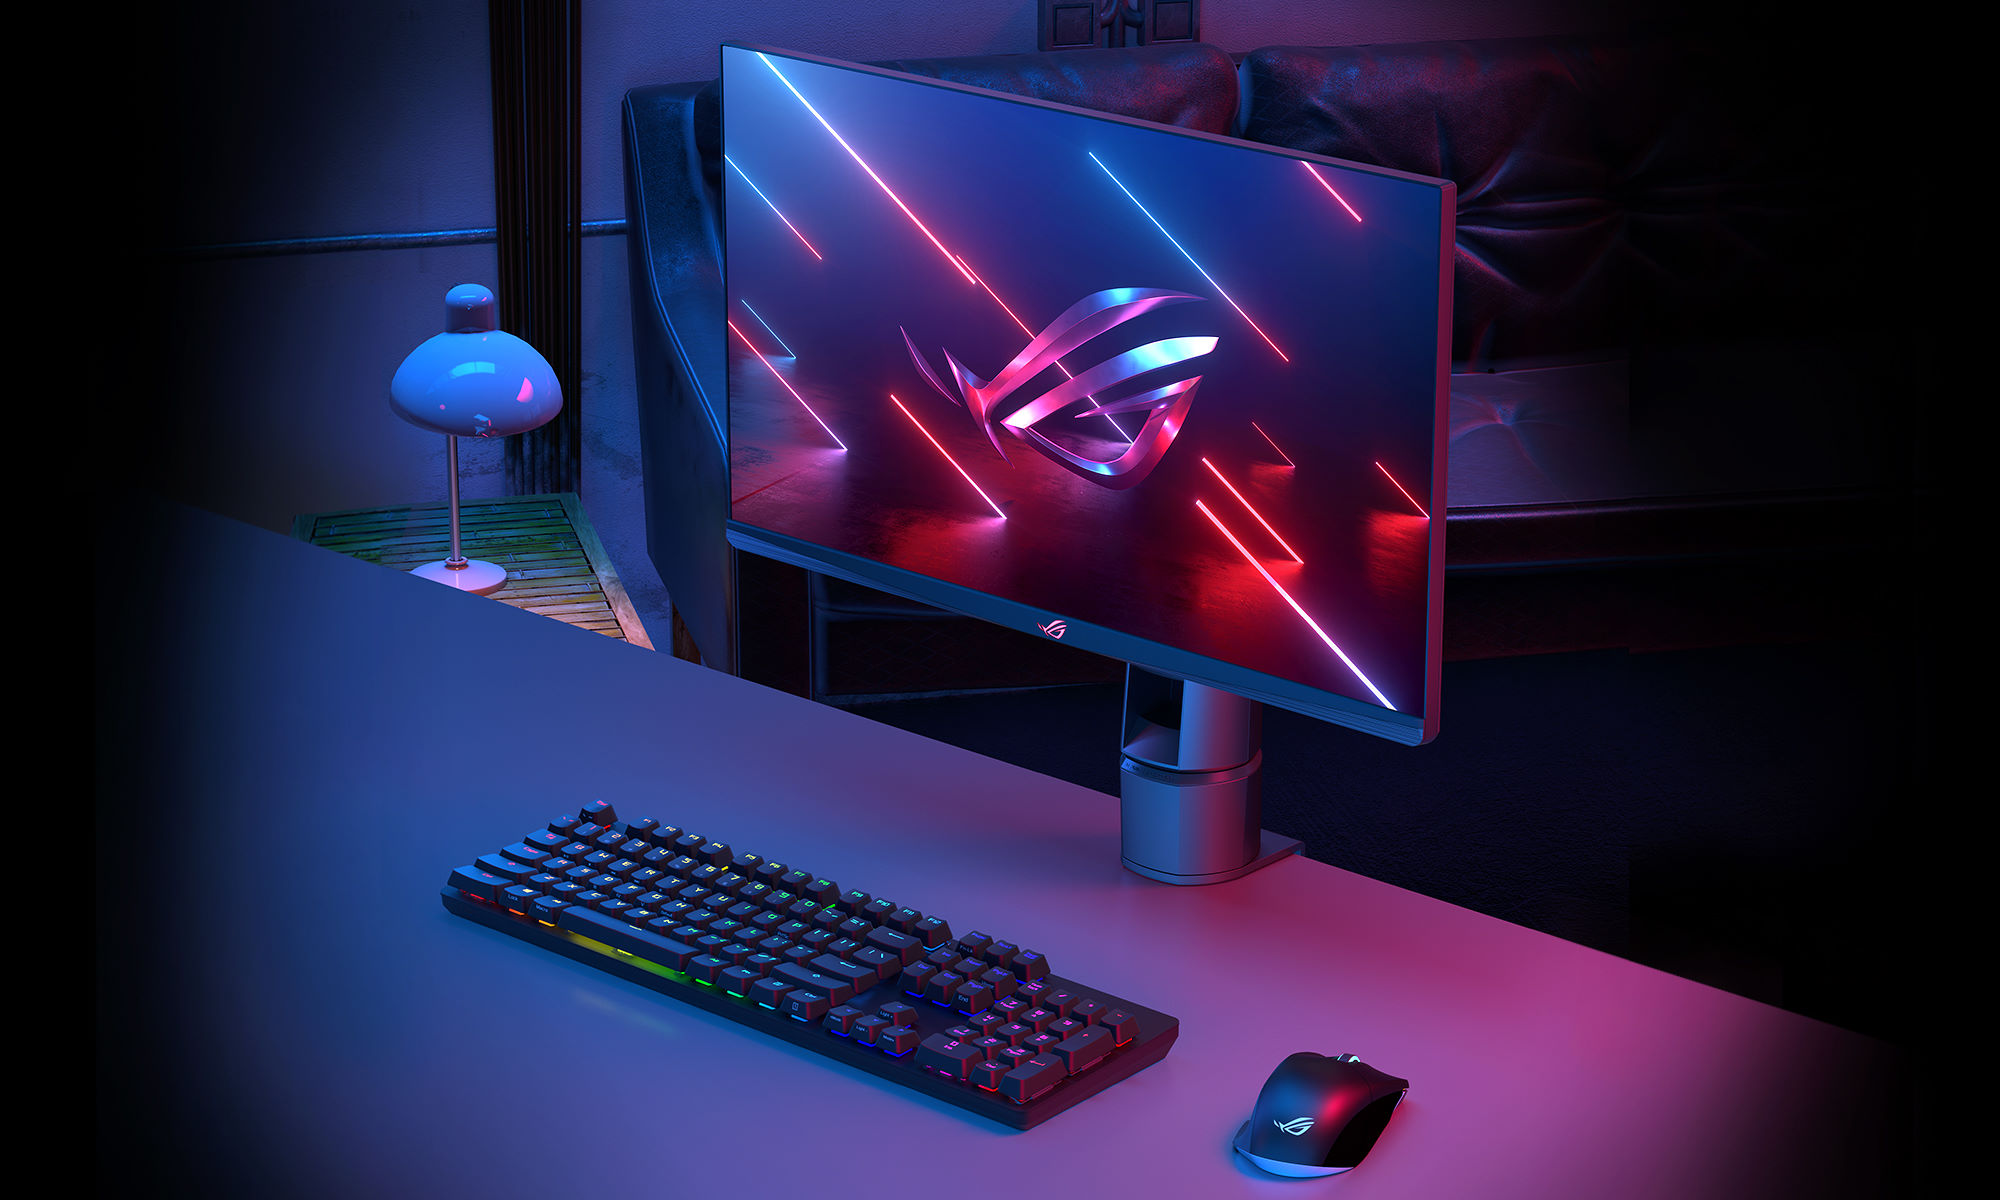 The ROG Swift 360Hz PG259QNR gaming monitor helps elite gamers measure and  minimize system latency